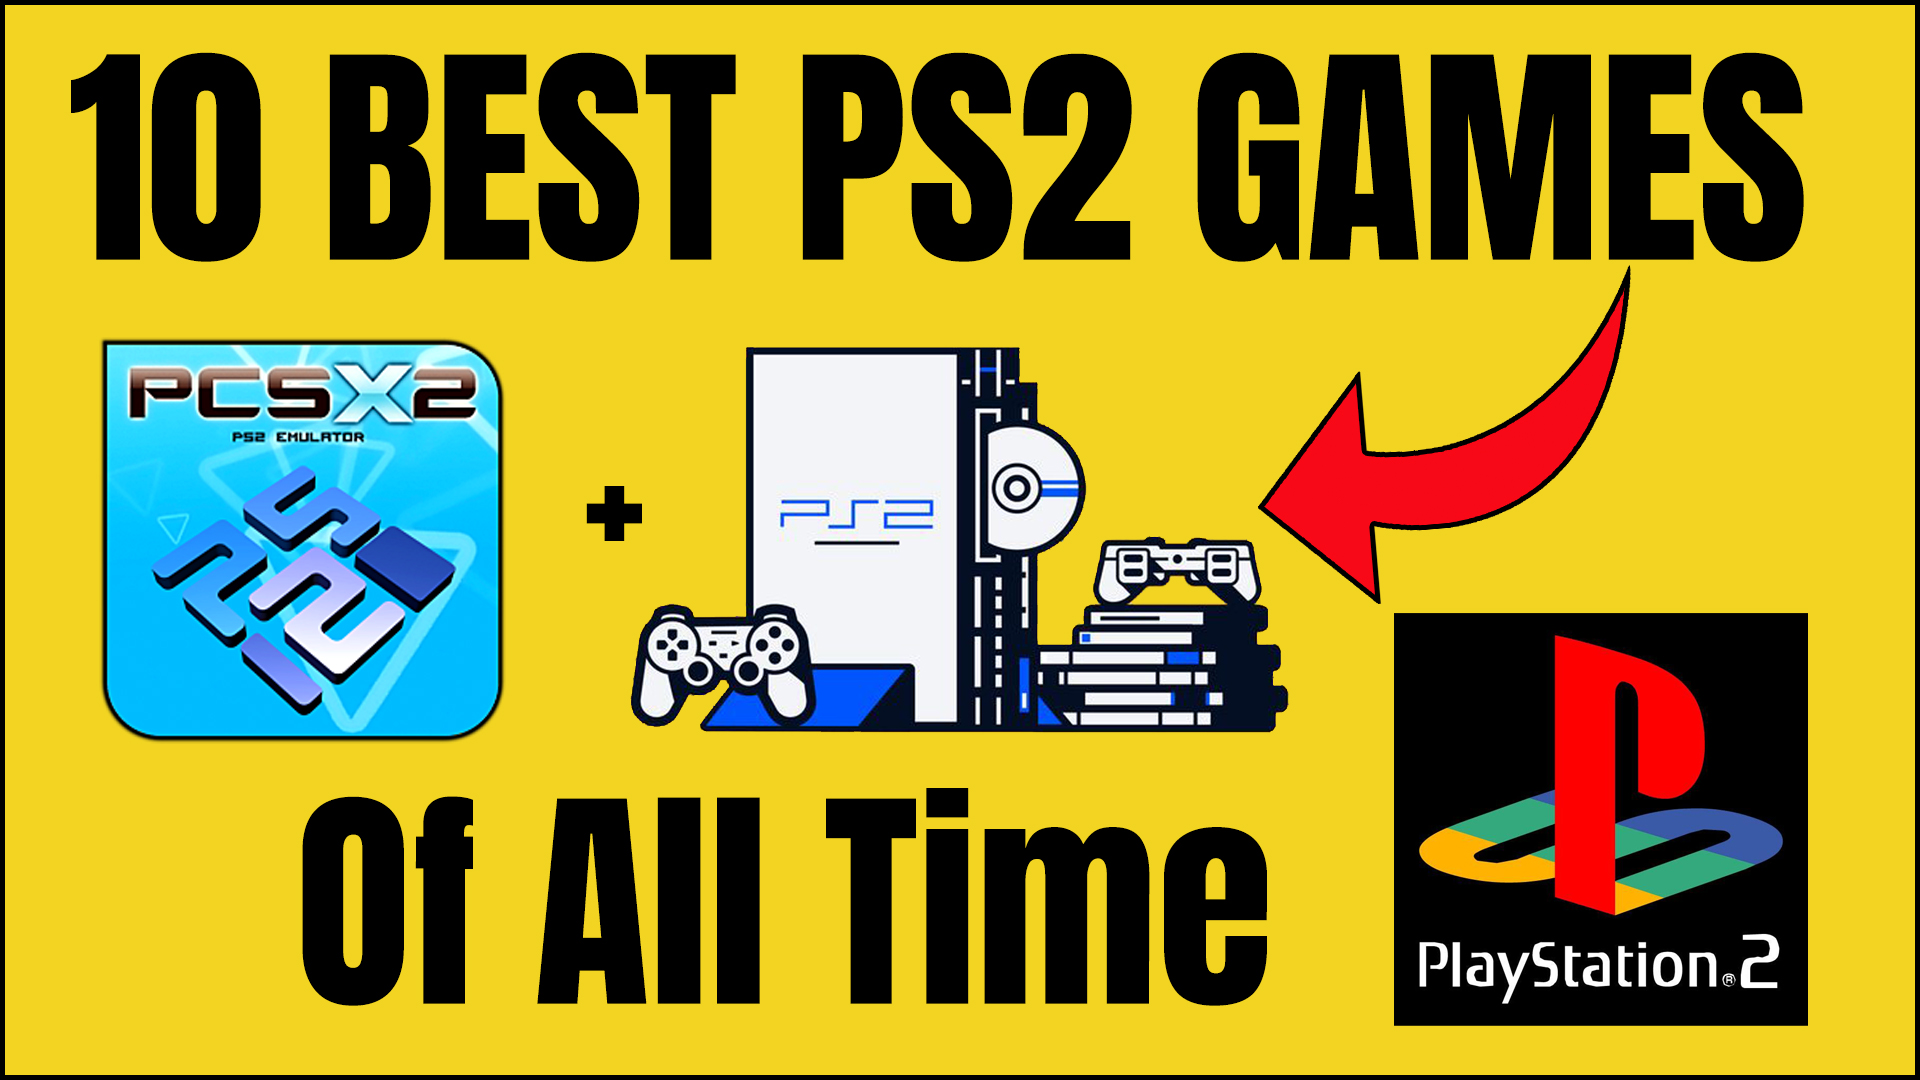 10 Best PS2 Games of All Time - Improve Your Gaming Skills